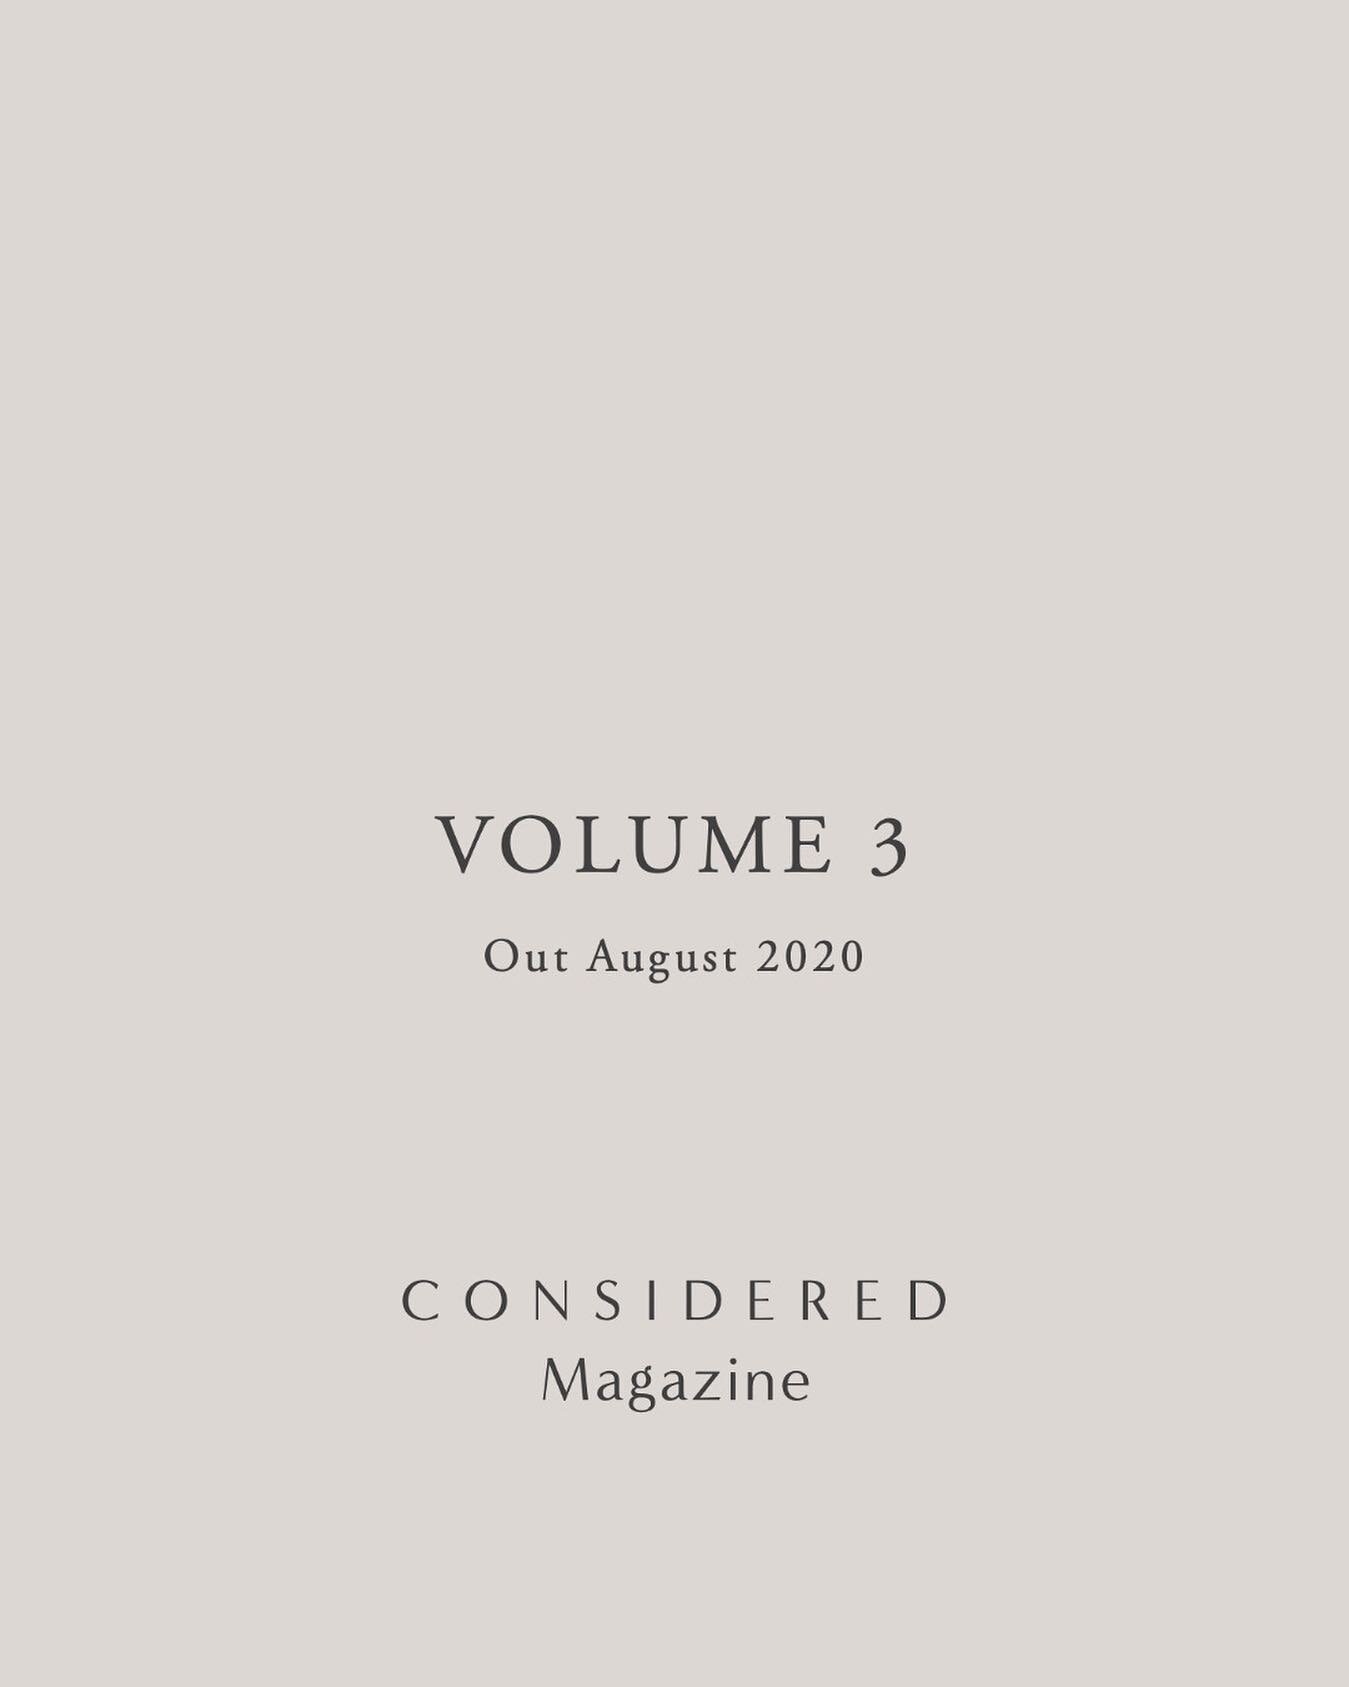 Volume 3 - out August 2020 ✨ ⠀
⠀
We want to thank you for your patience whilst we&rsquo;ve been working behind the scenes during these turbulent times to bring you Volume 3.⠀
⠀
More soon...⠀
⠀
With love,⠀
⠀
The CONSIDERED Team,⠀
⠀
x